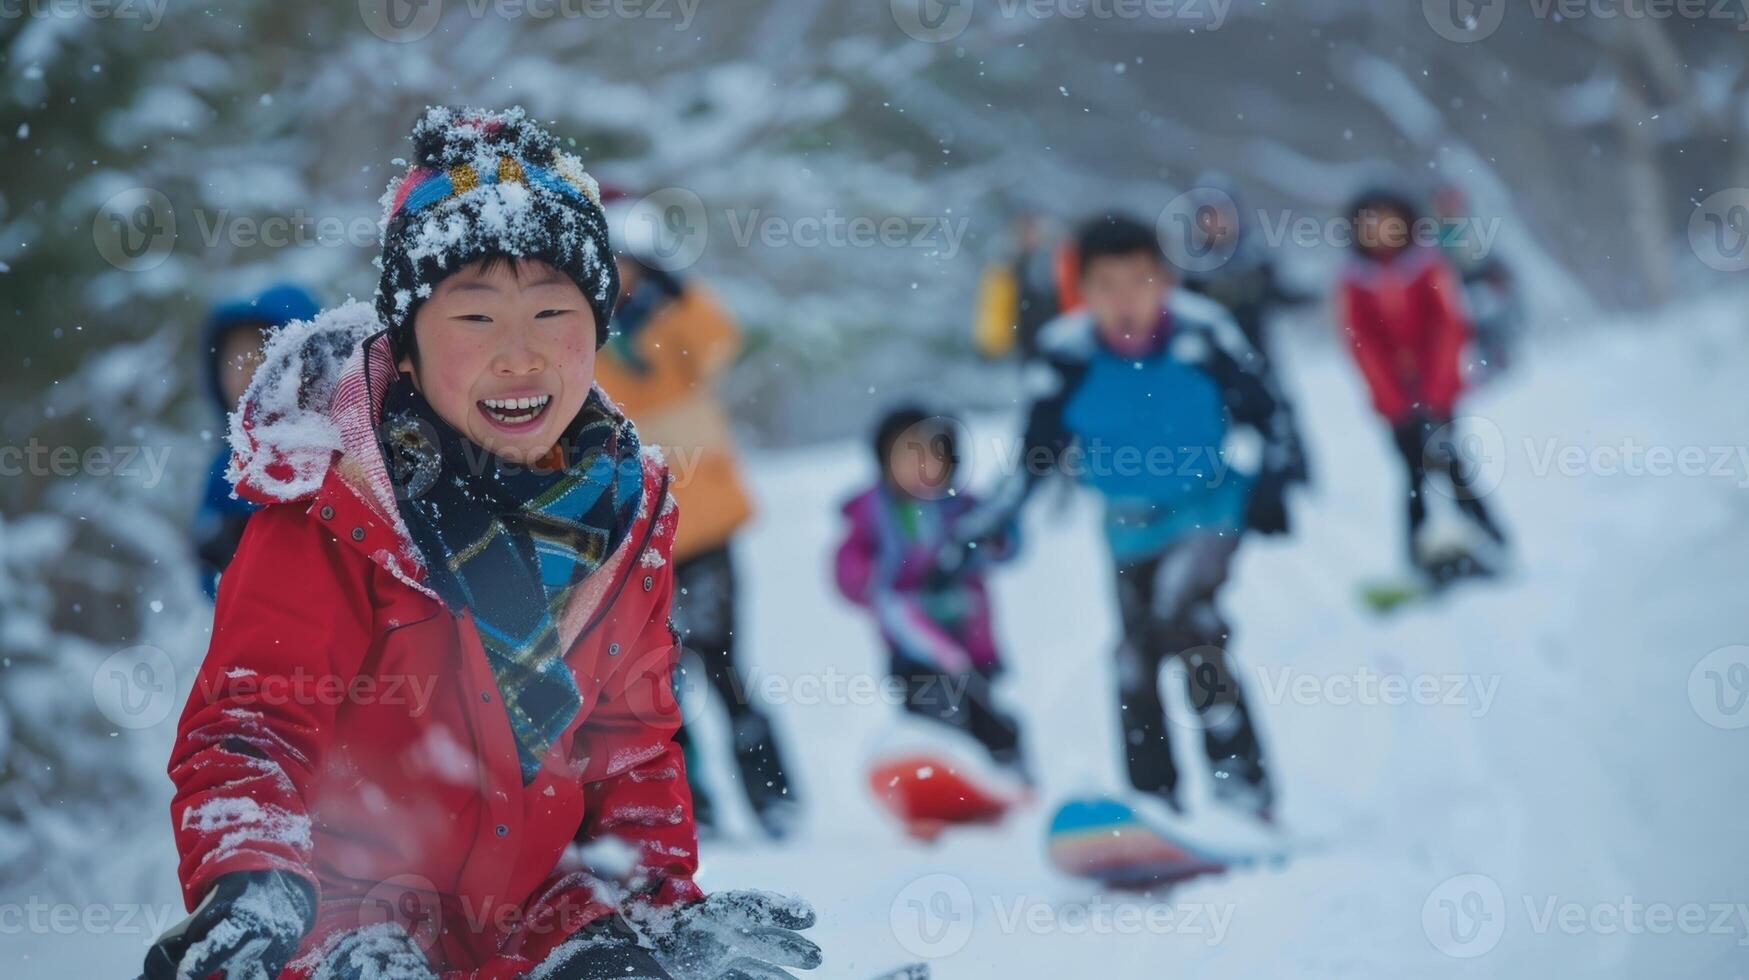 The joy and excitement on the faces of participants as they take part in this unique winter activity. 2d flat cartoon photo